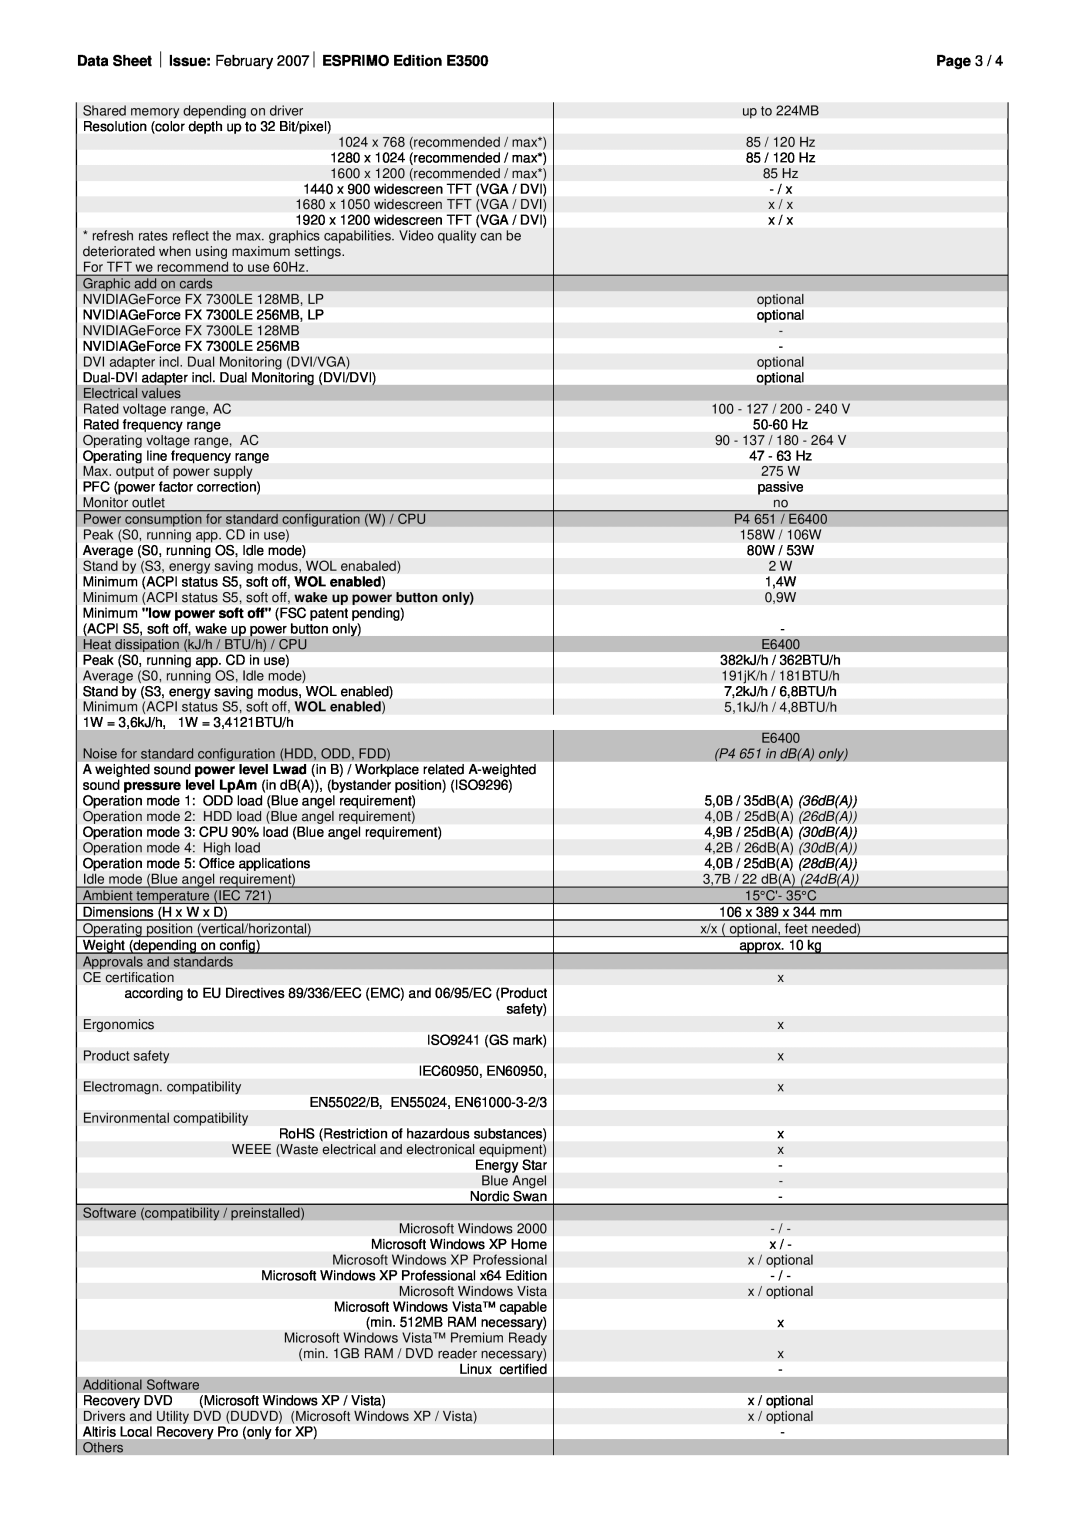 Fujitsu Siemens Computers manual Page 3, Data Sheet Issue February 2007 ESPRIMO Edition E3500, P4 651 in dBA only 